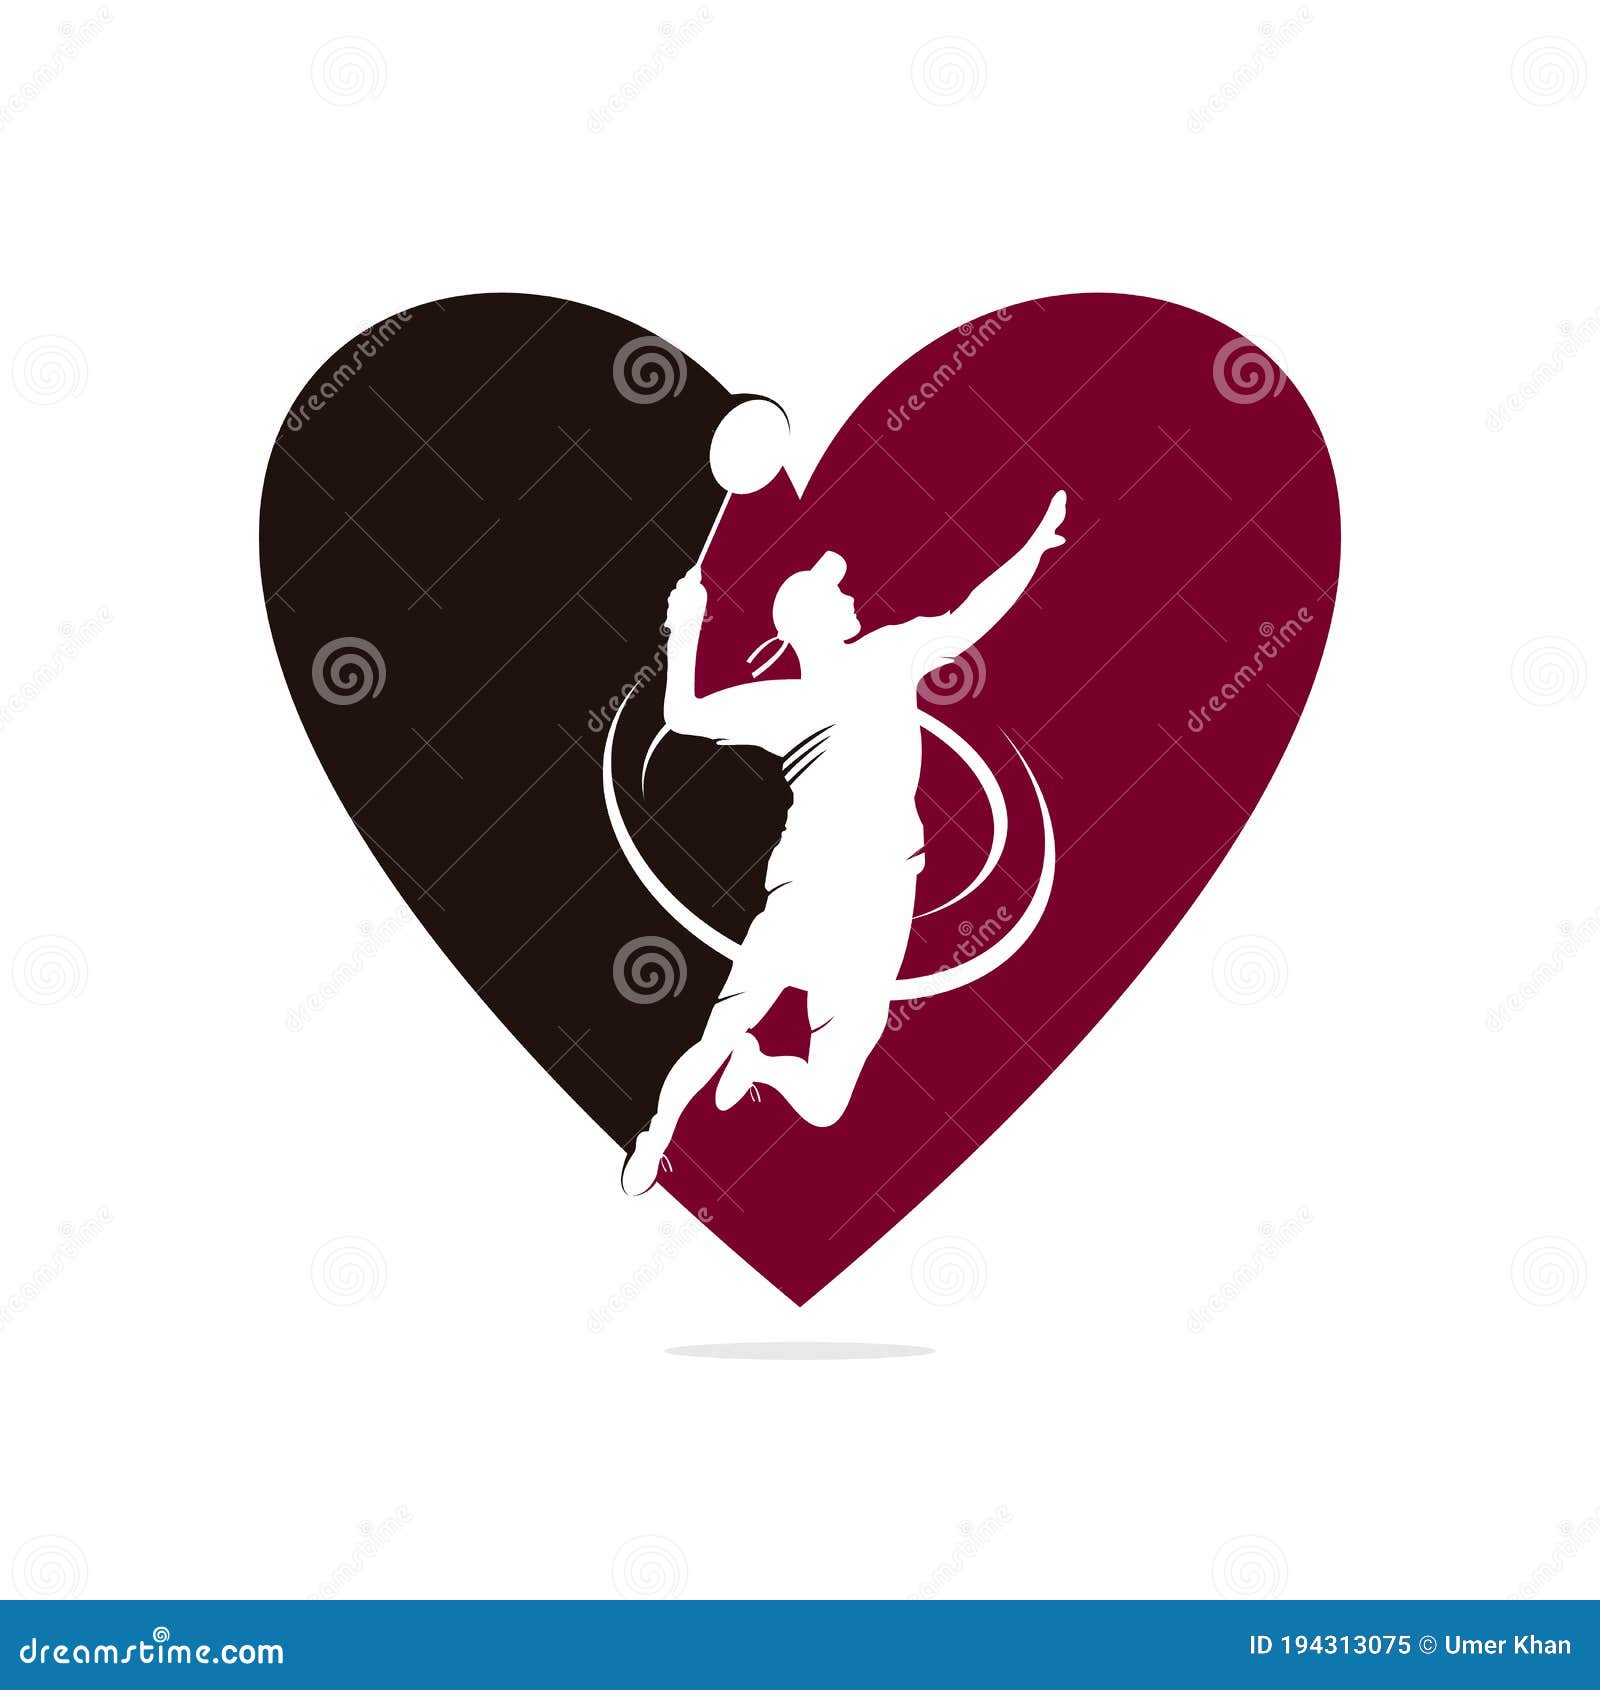 Isolated Cute Cupid In A Floating Pose With Bow And Red Heart Shape Ballon  Stock Illustration - Download Image Now - iStock